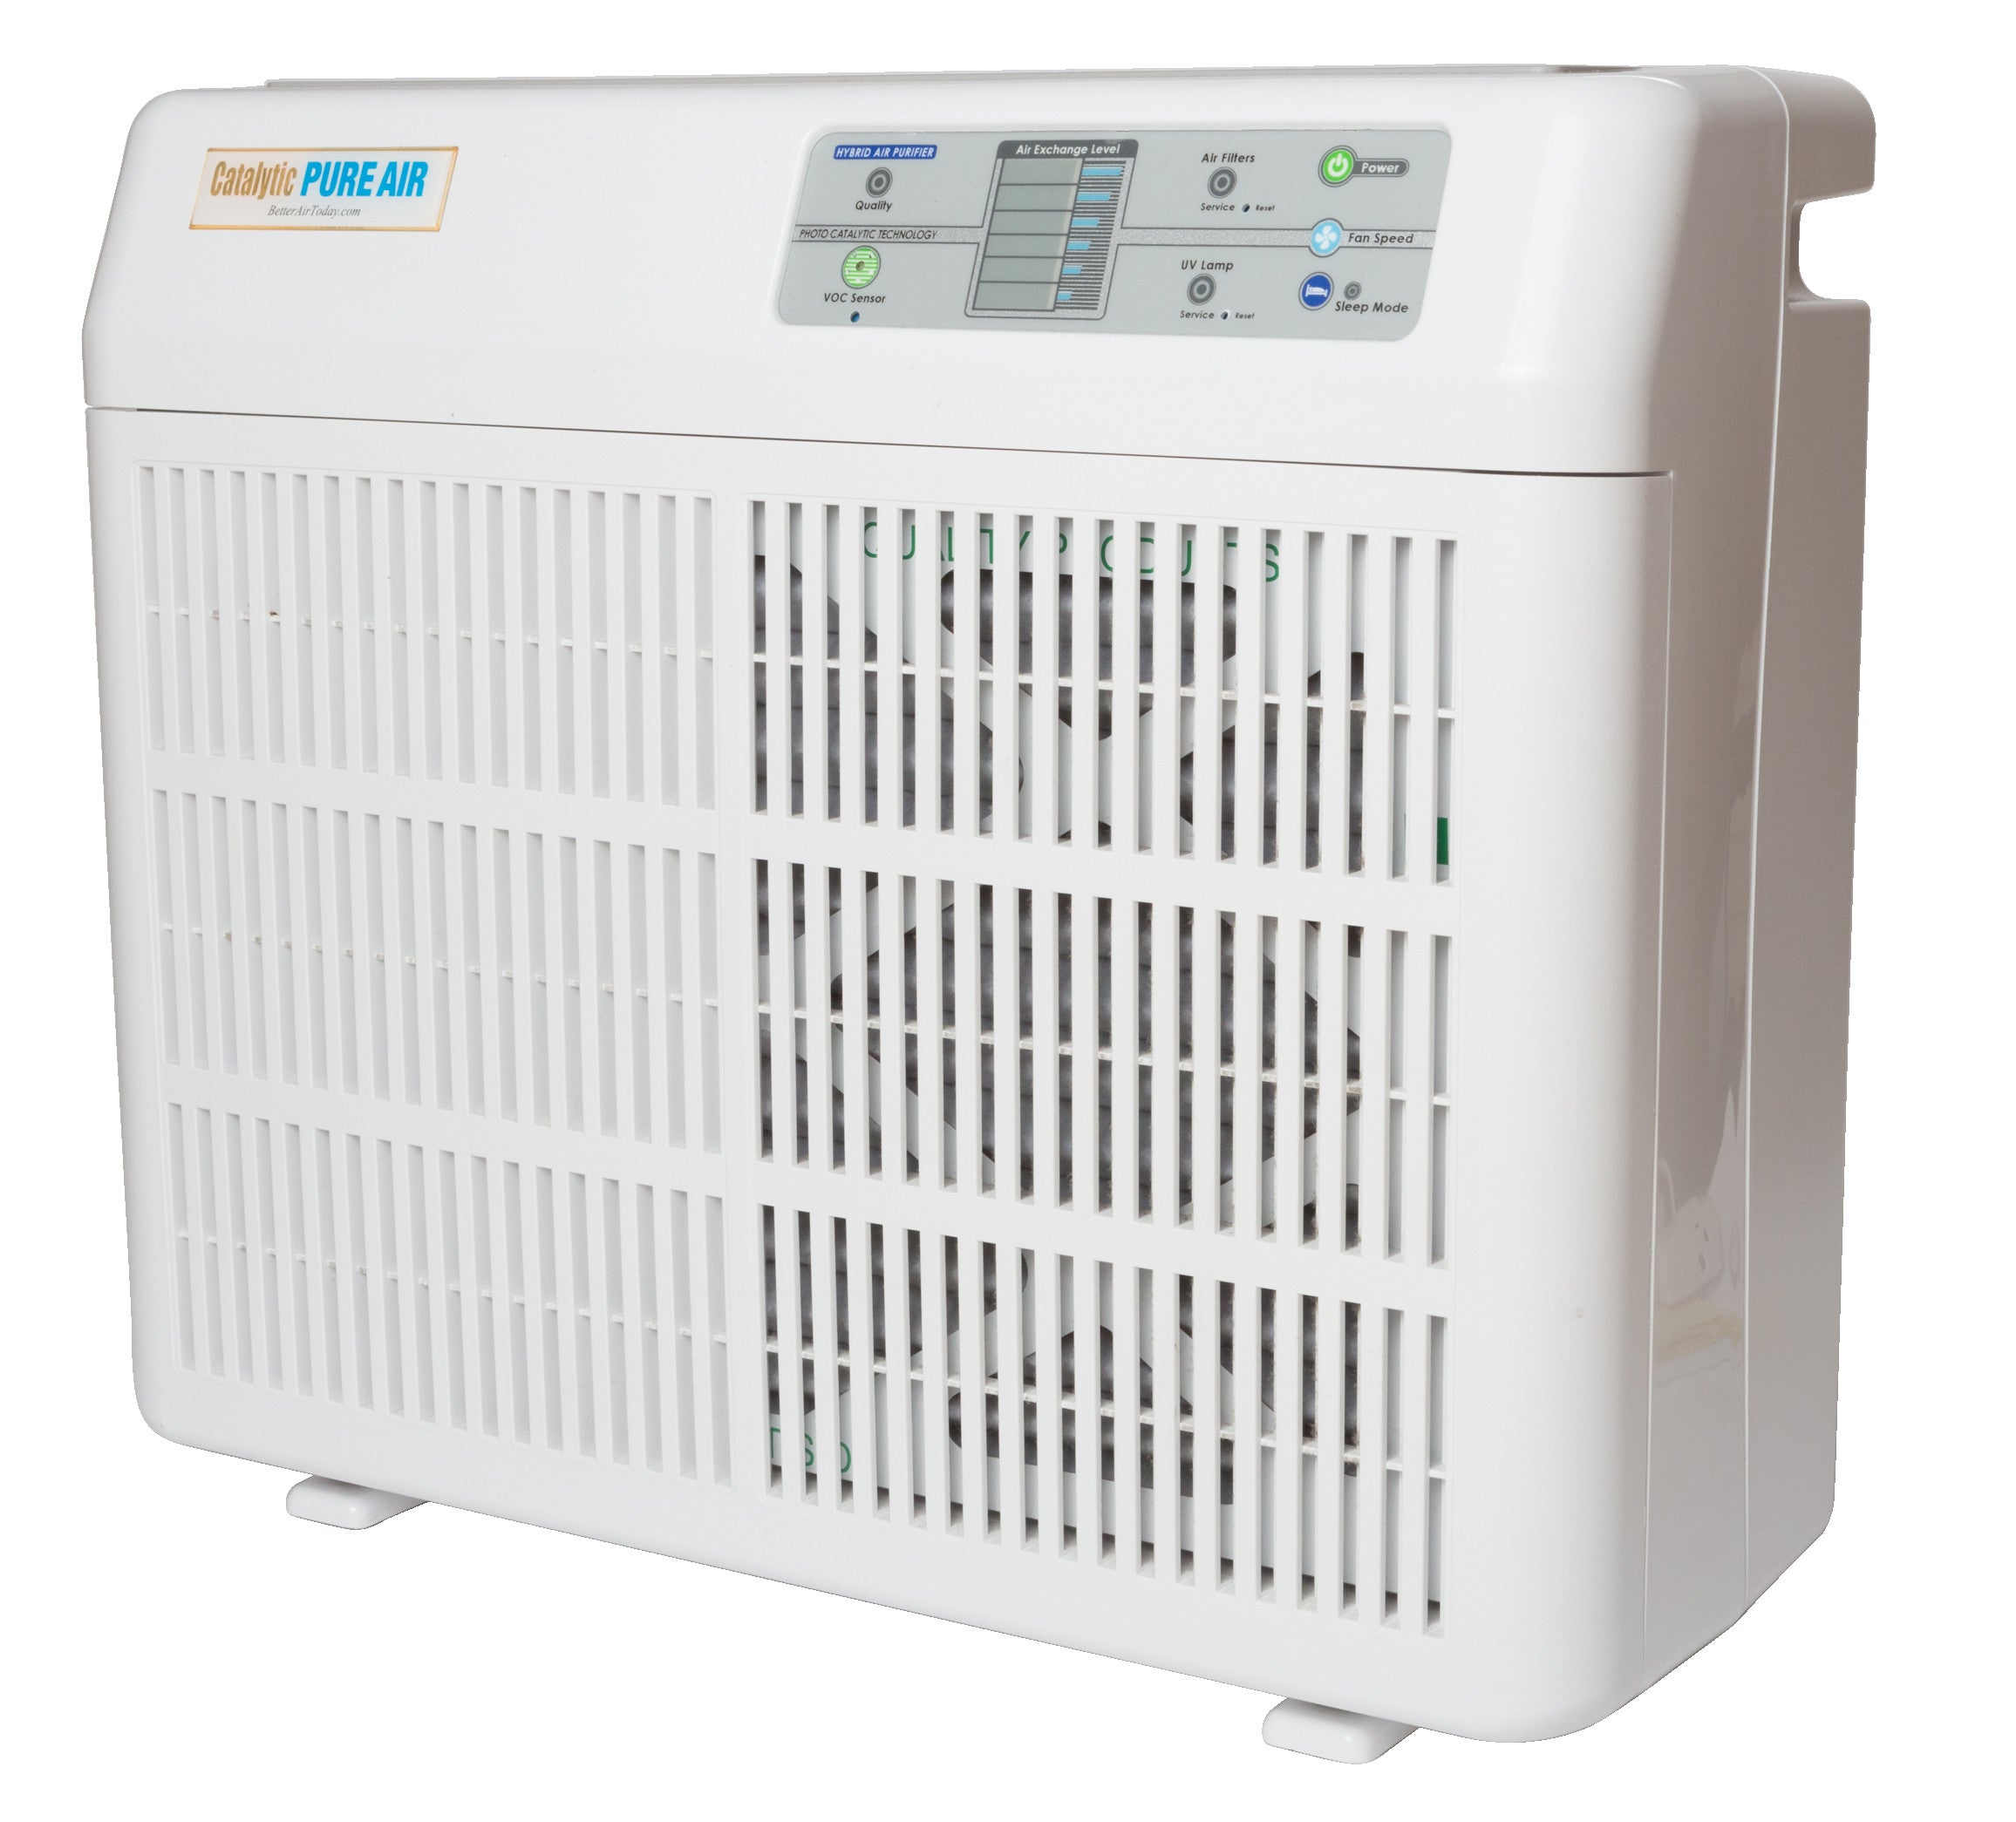 Catalytic PURE AIR Purifier